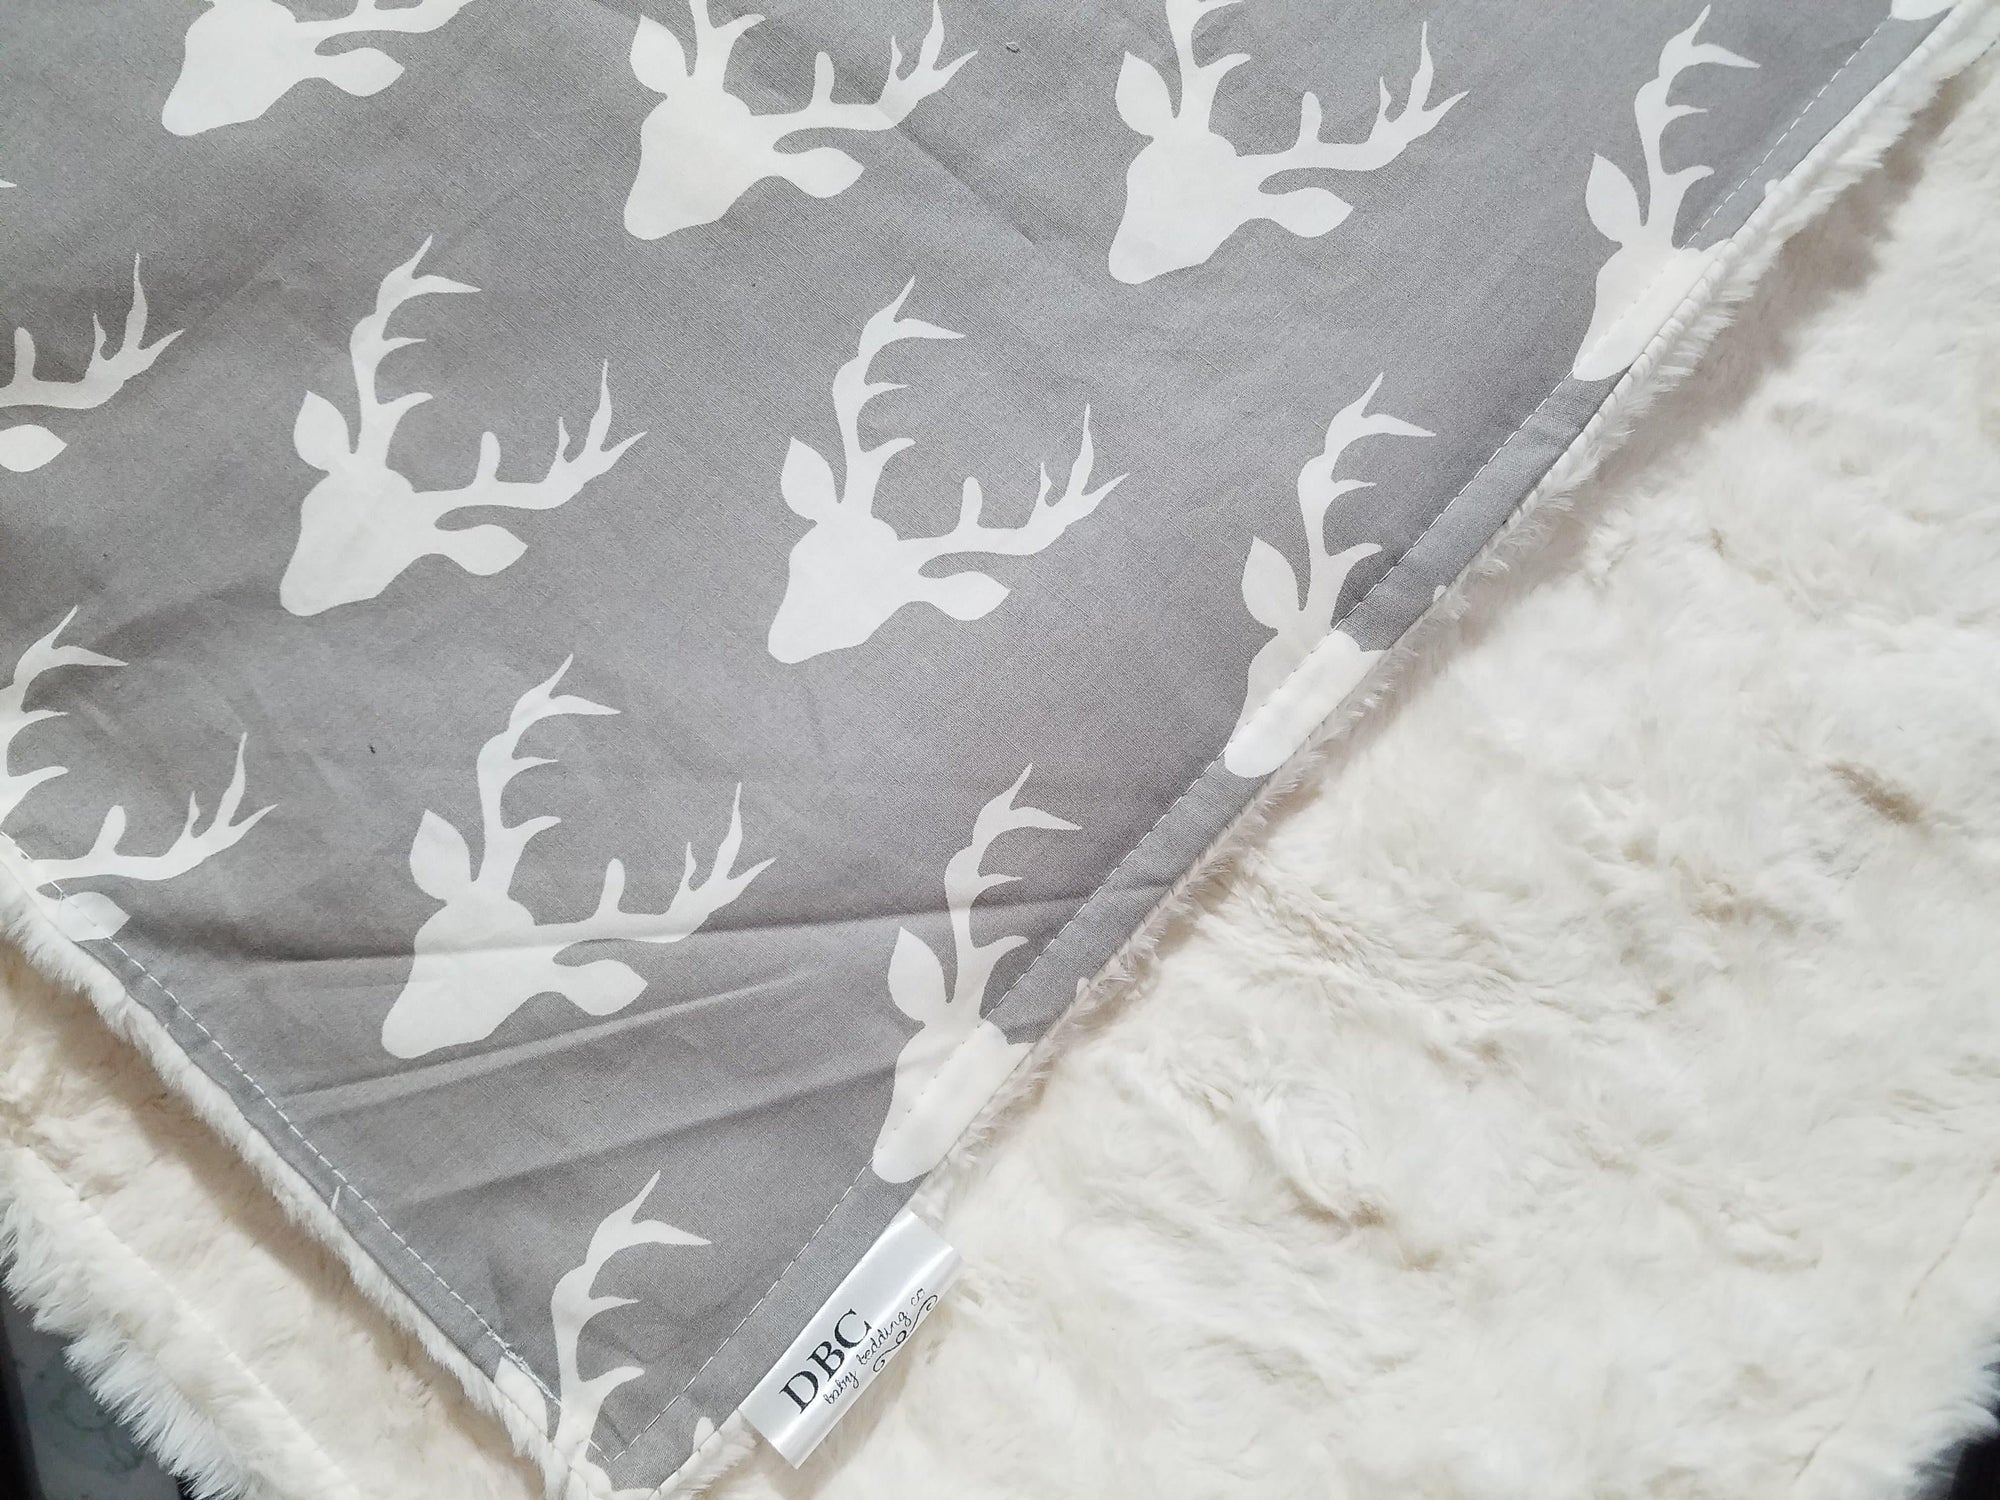 Standard Blanket - Light Gray Buck and Ivory Crushed Minky Blanket - DBC Baby Bedding Co 